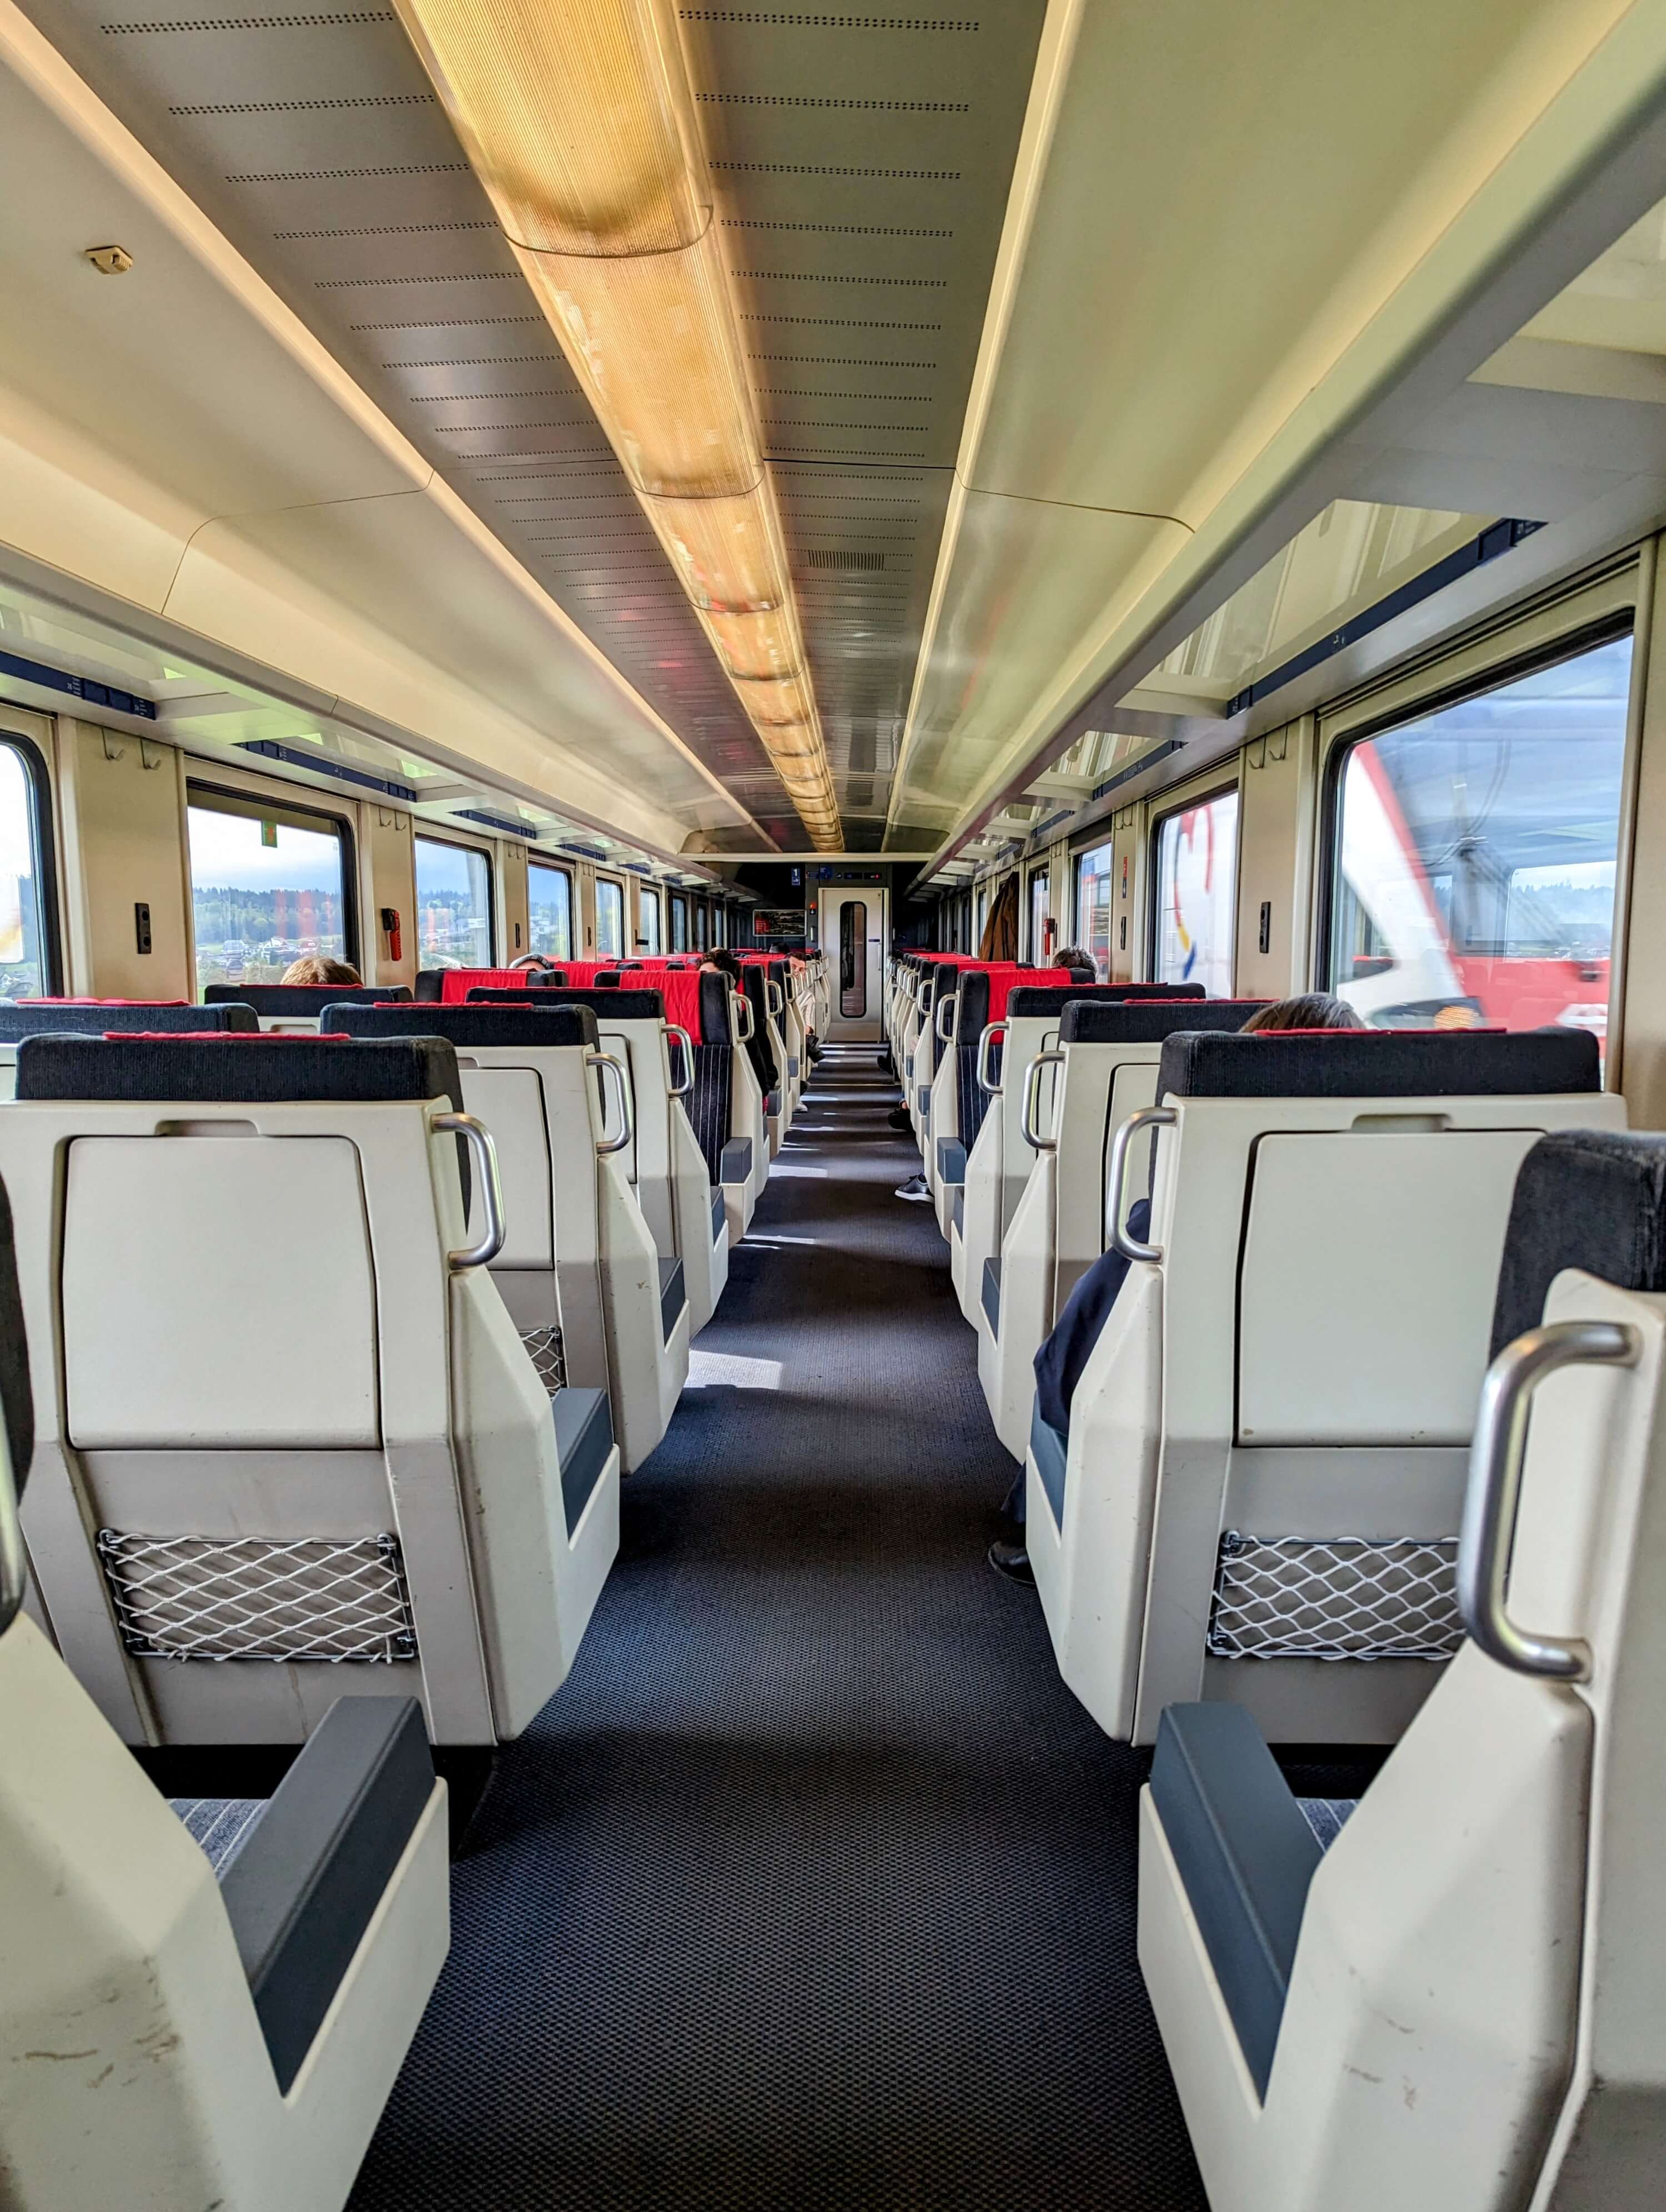 Inside of a typical Swiss train